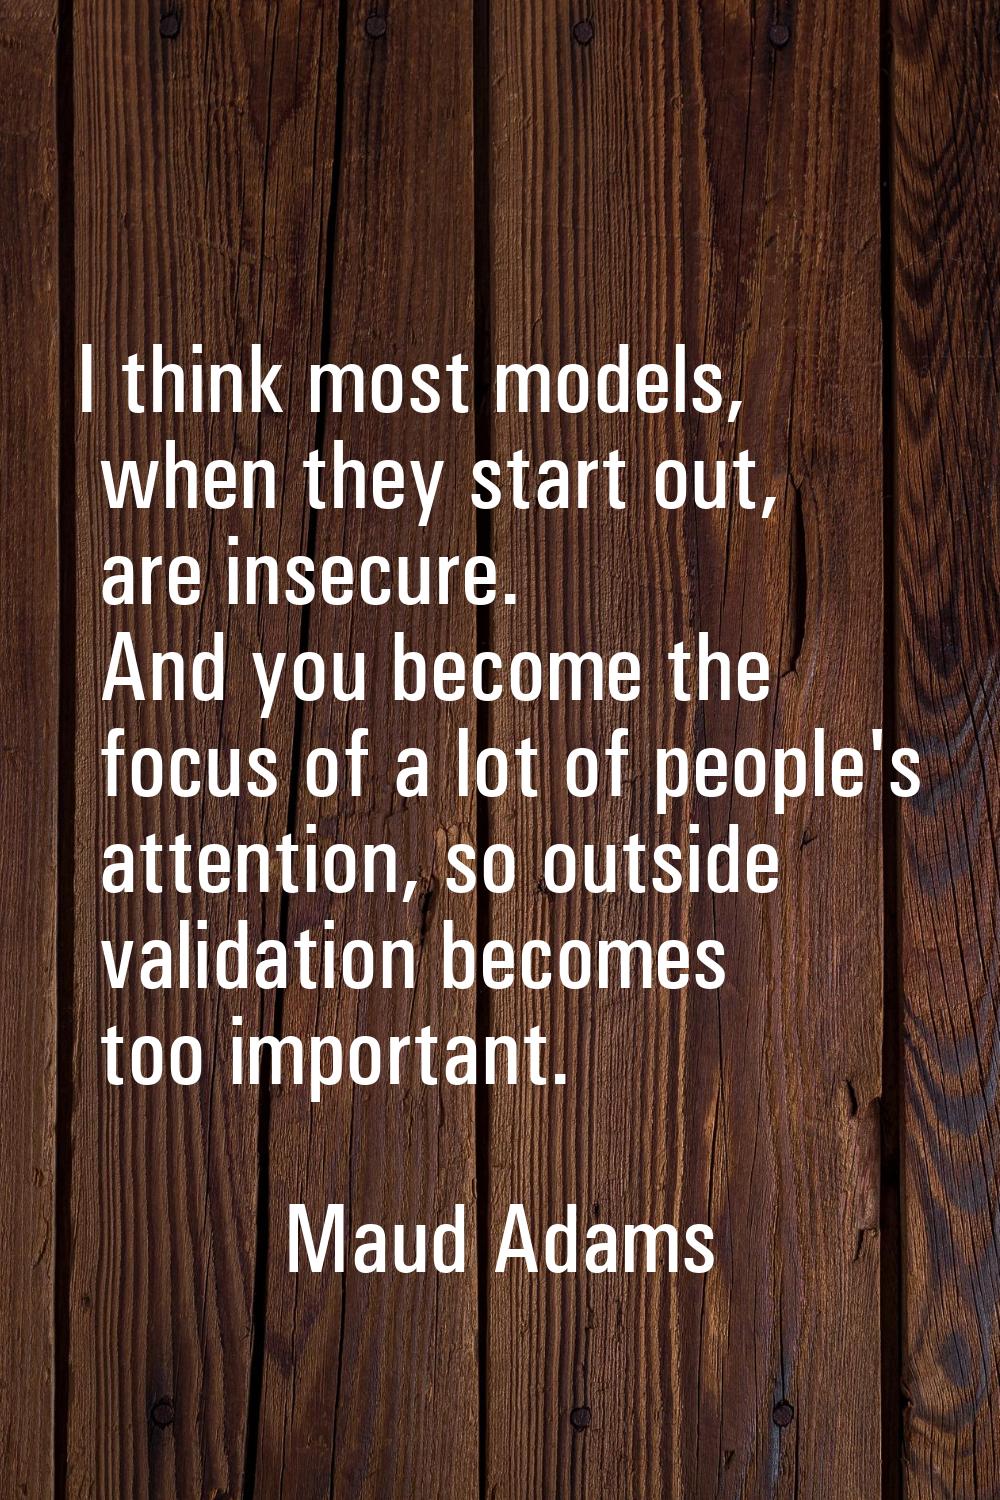 I think most models, when they start out, are insecure. And you become the focus of a lot of people